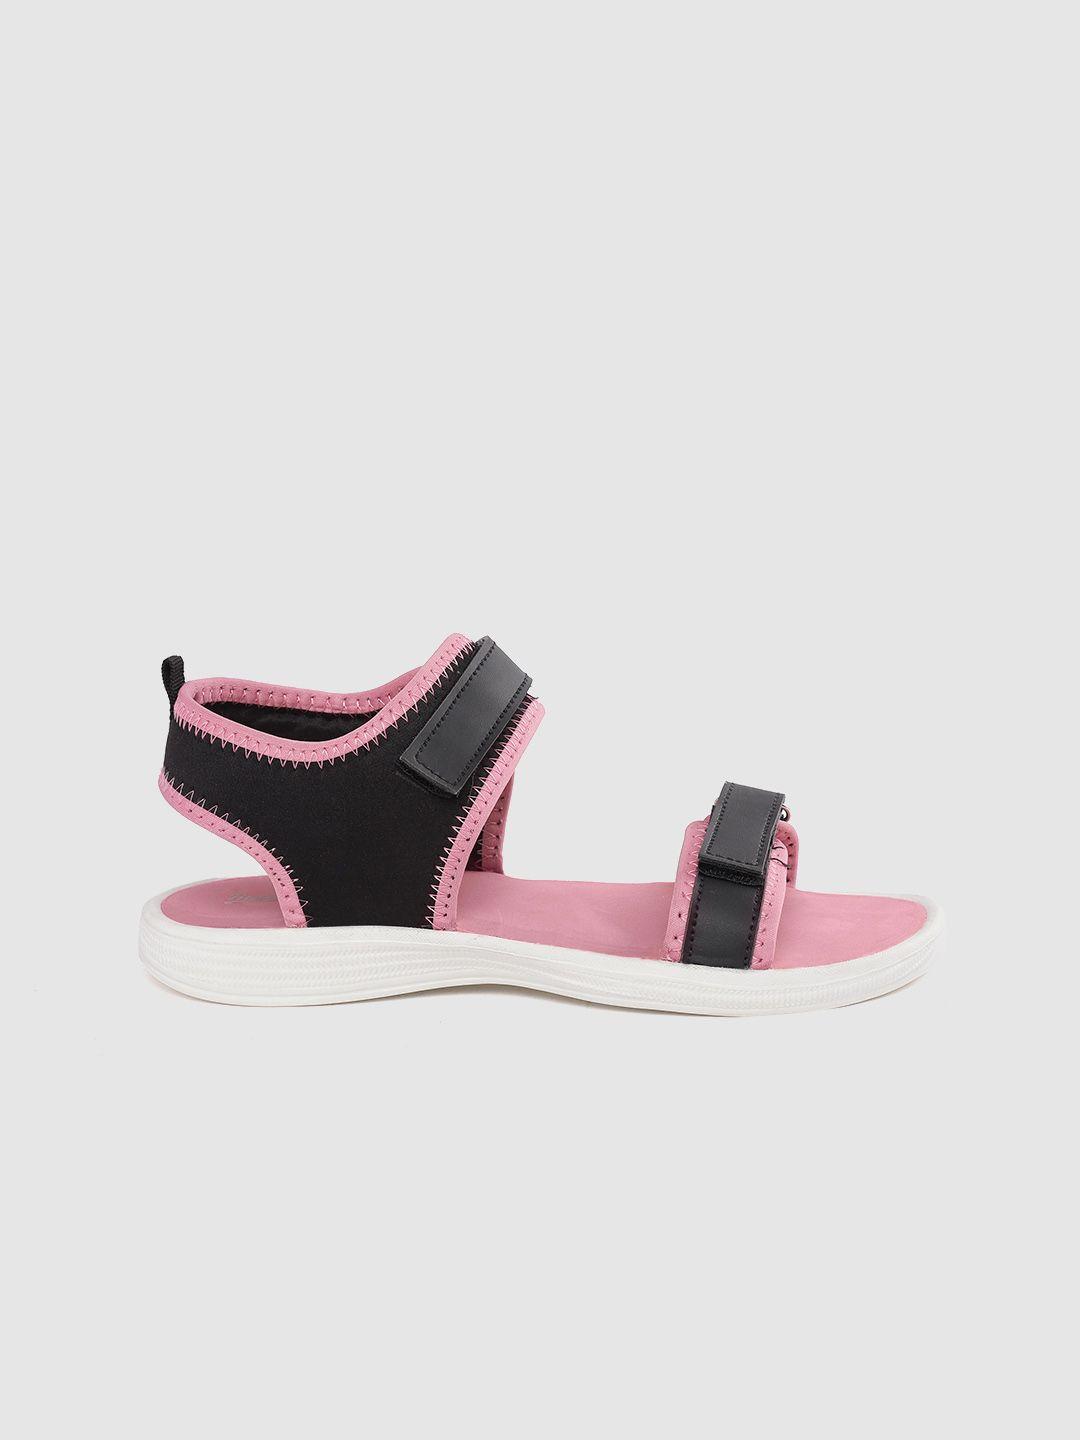 the-roadster-lifestyle-co-women-black-&-dusty-pink-solid-sports-sandals